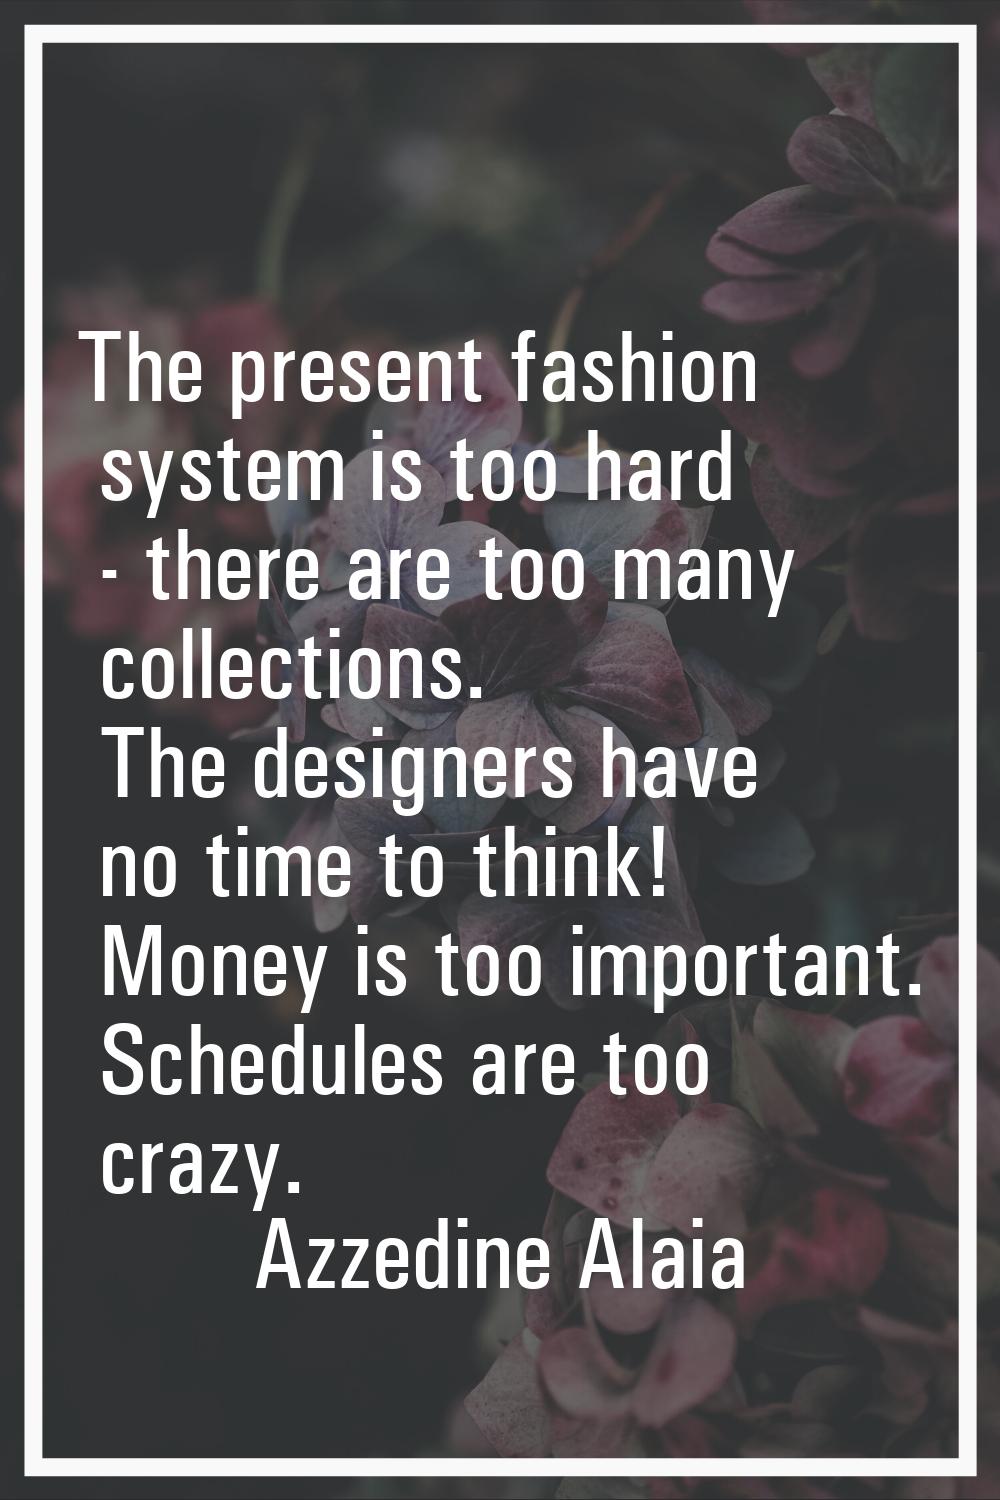 The present fashion system is too hard - there are too many collections. The designers have no time